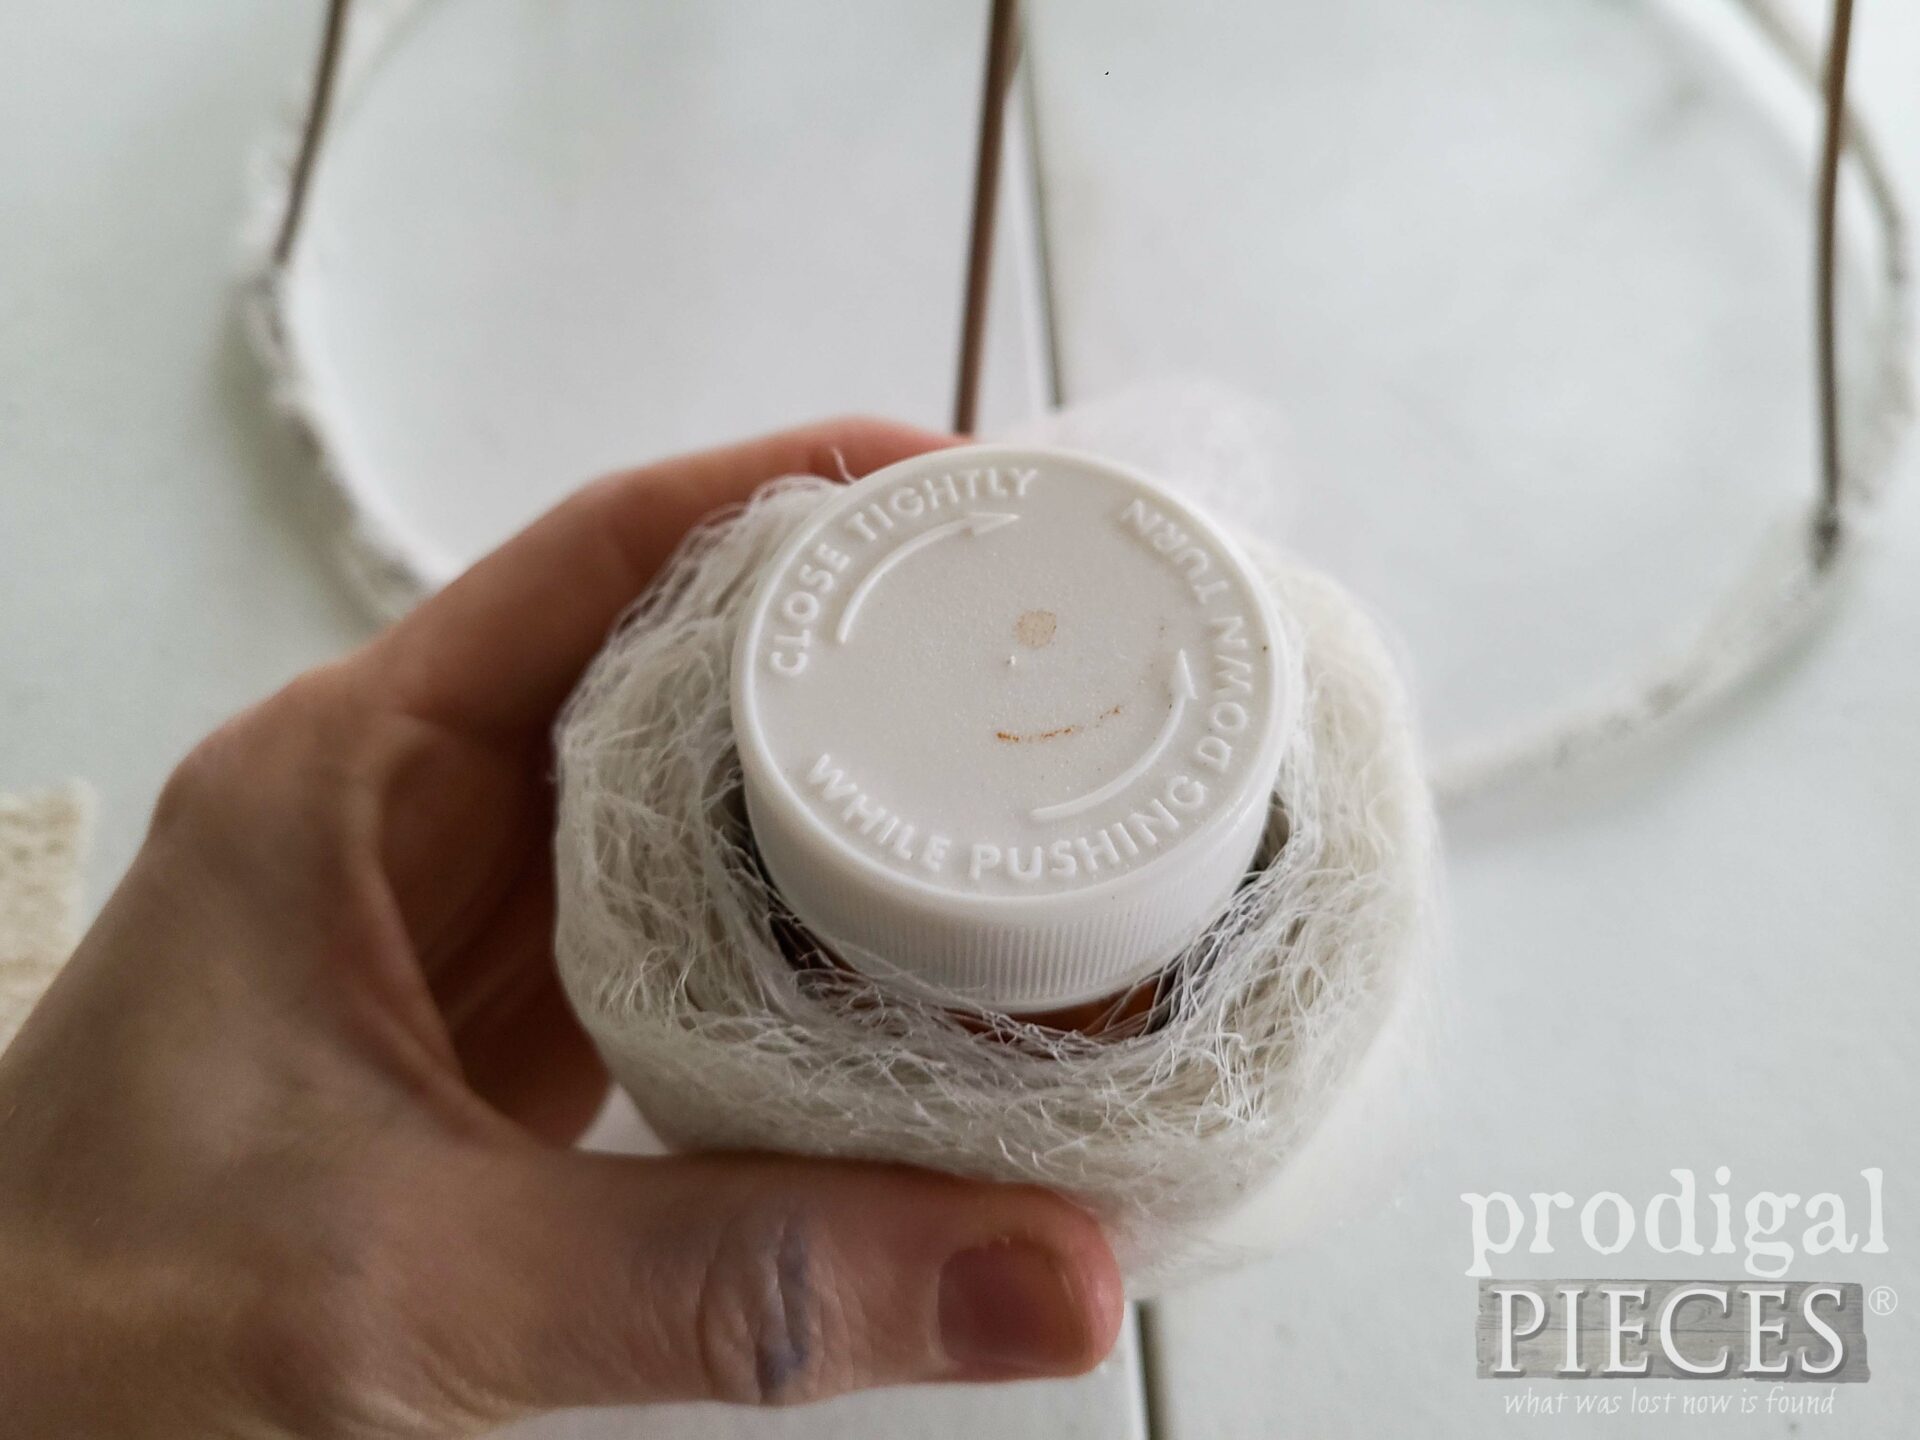 Medicine Bottle Wrapped in Interfacing | prodigalpieces.com #prodigalpieces